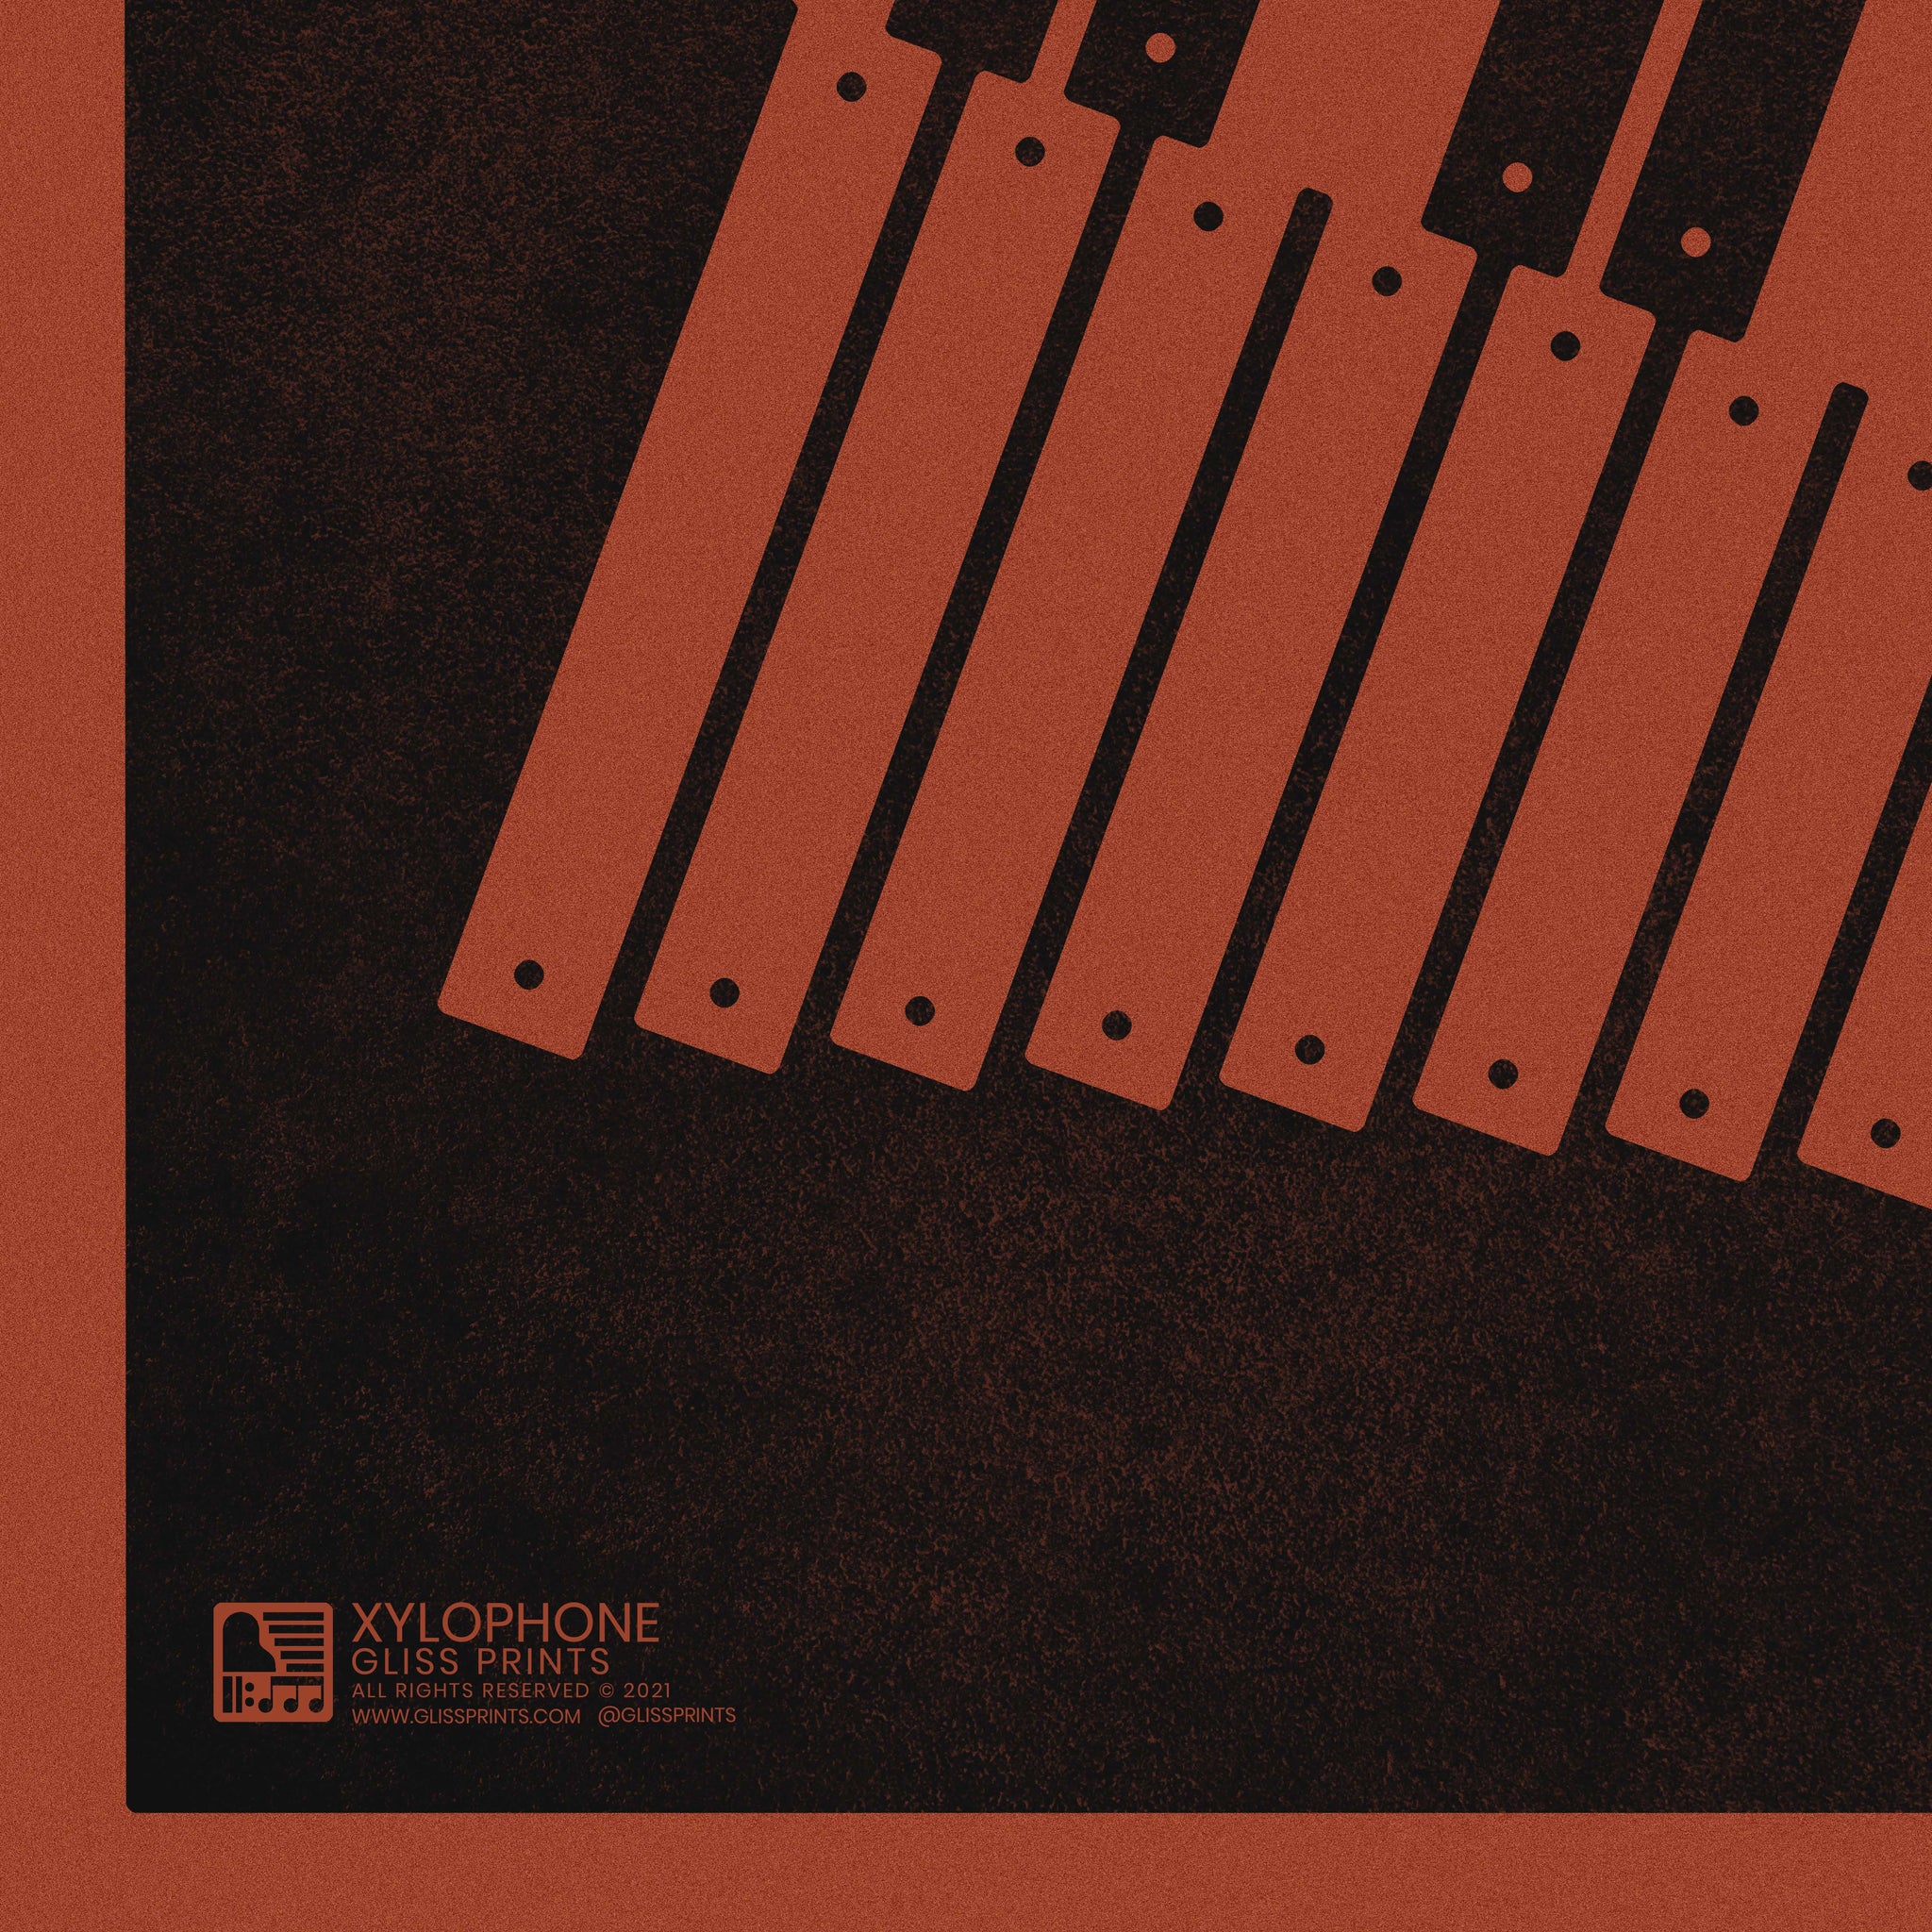 Xylophone Poster, Music Art Print, Red